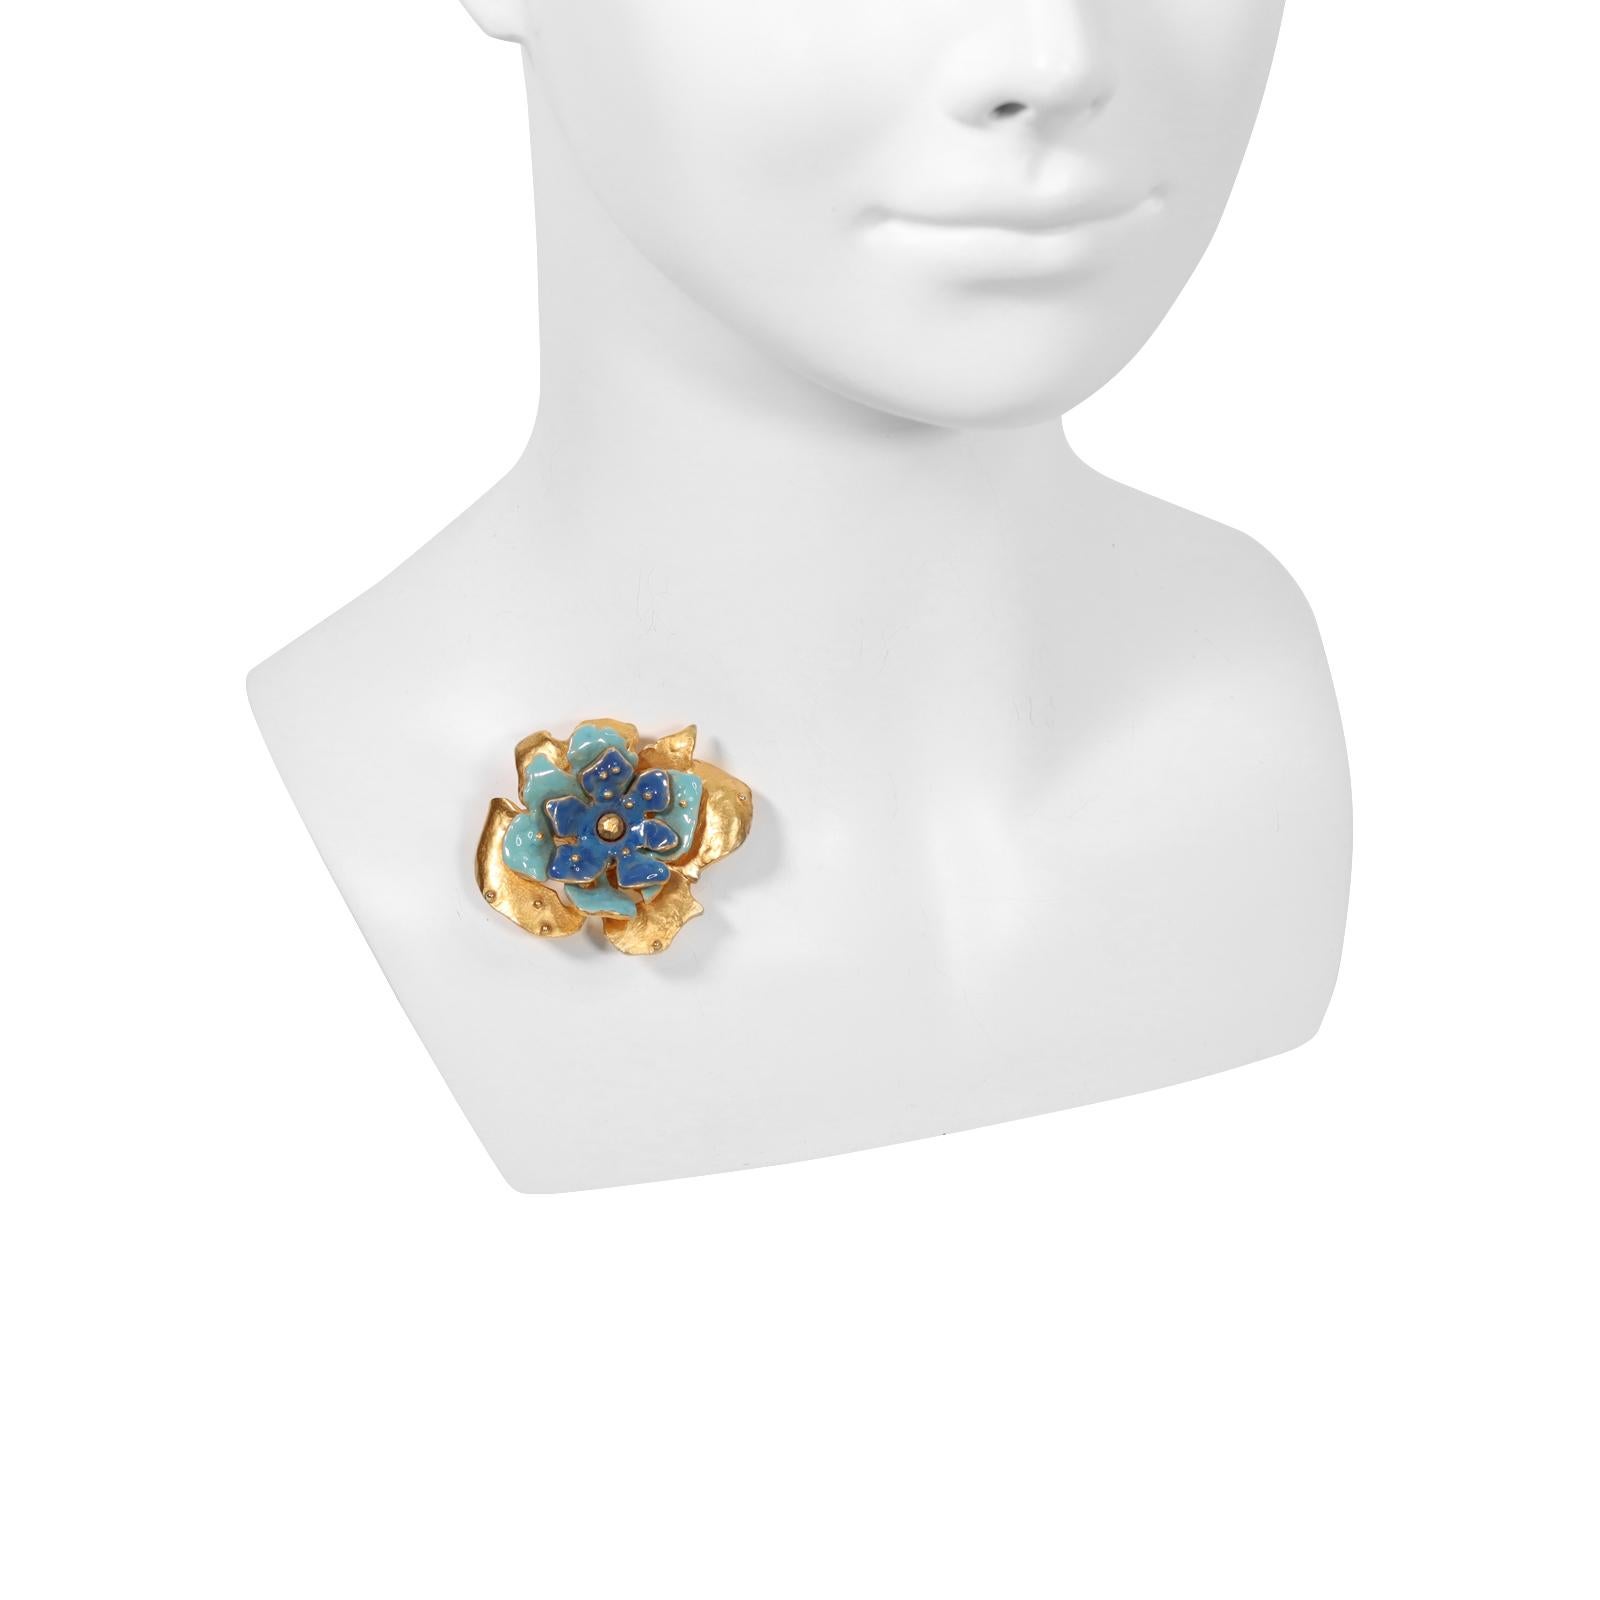 Vintage Scherrer Gold Tone with Enamel Brooch. Two Different Blue Tone Enamel Flowers Unfold on top of the Gold Tone Brooch as if Blooming. A very modern look.  Would look great on a colorful Hermes scarf or even a plain scarf.